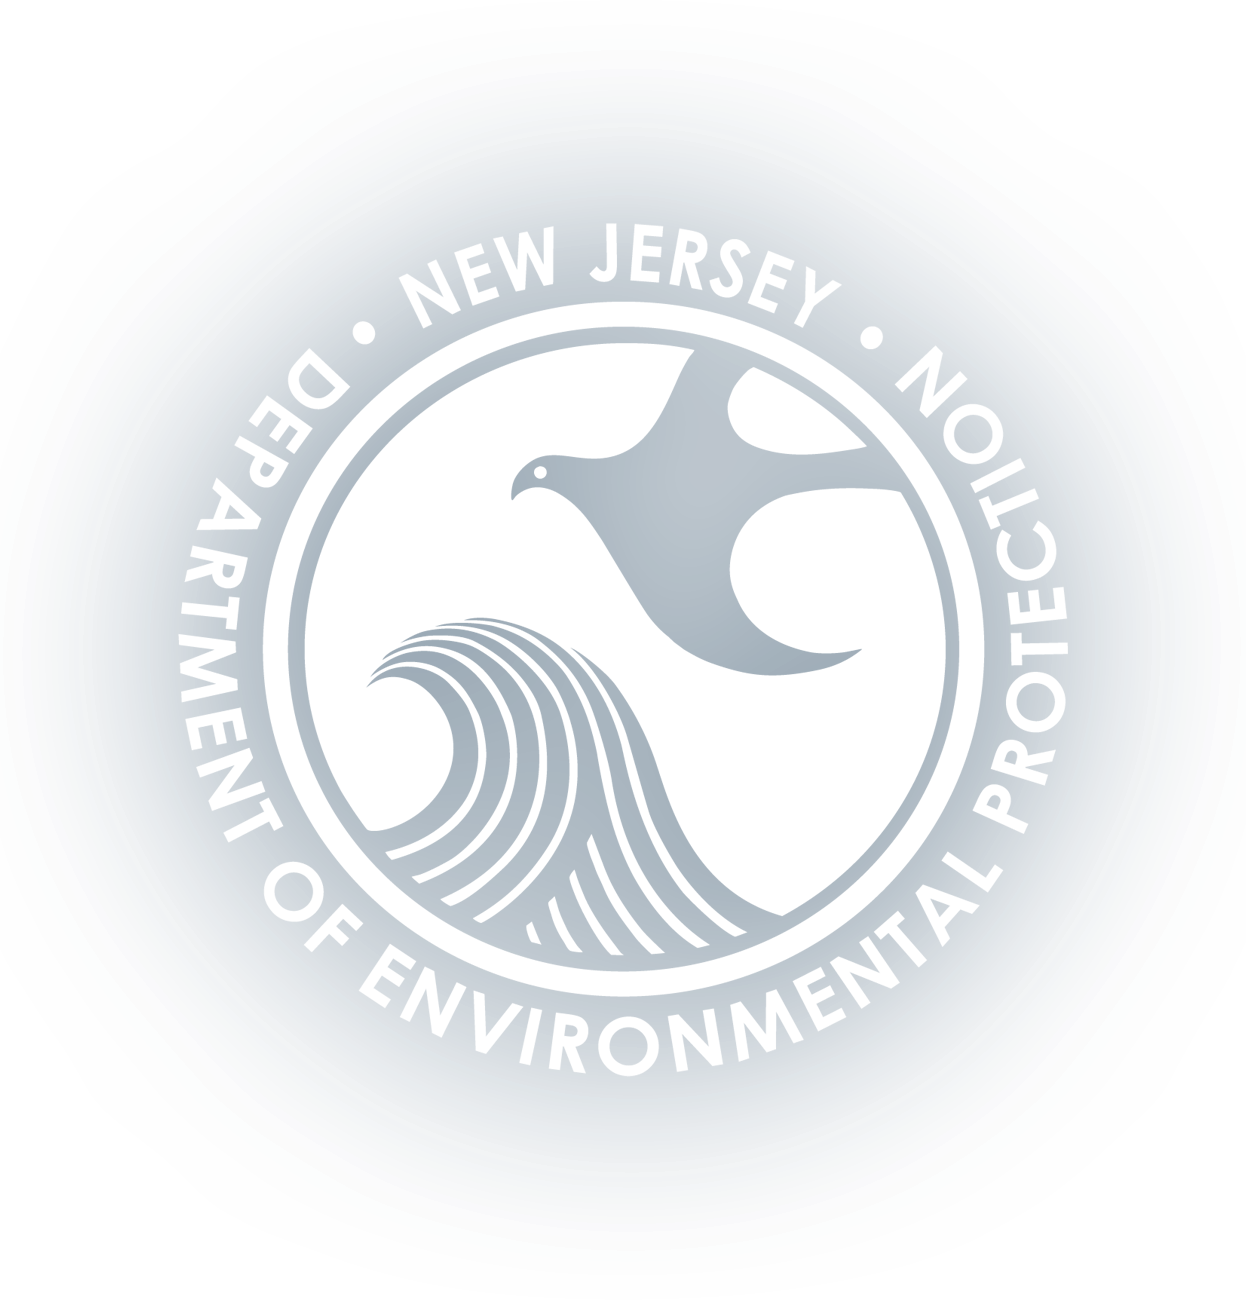 We, the Center, are teaming up with The New Jersey Conservation